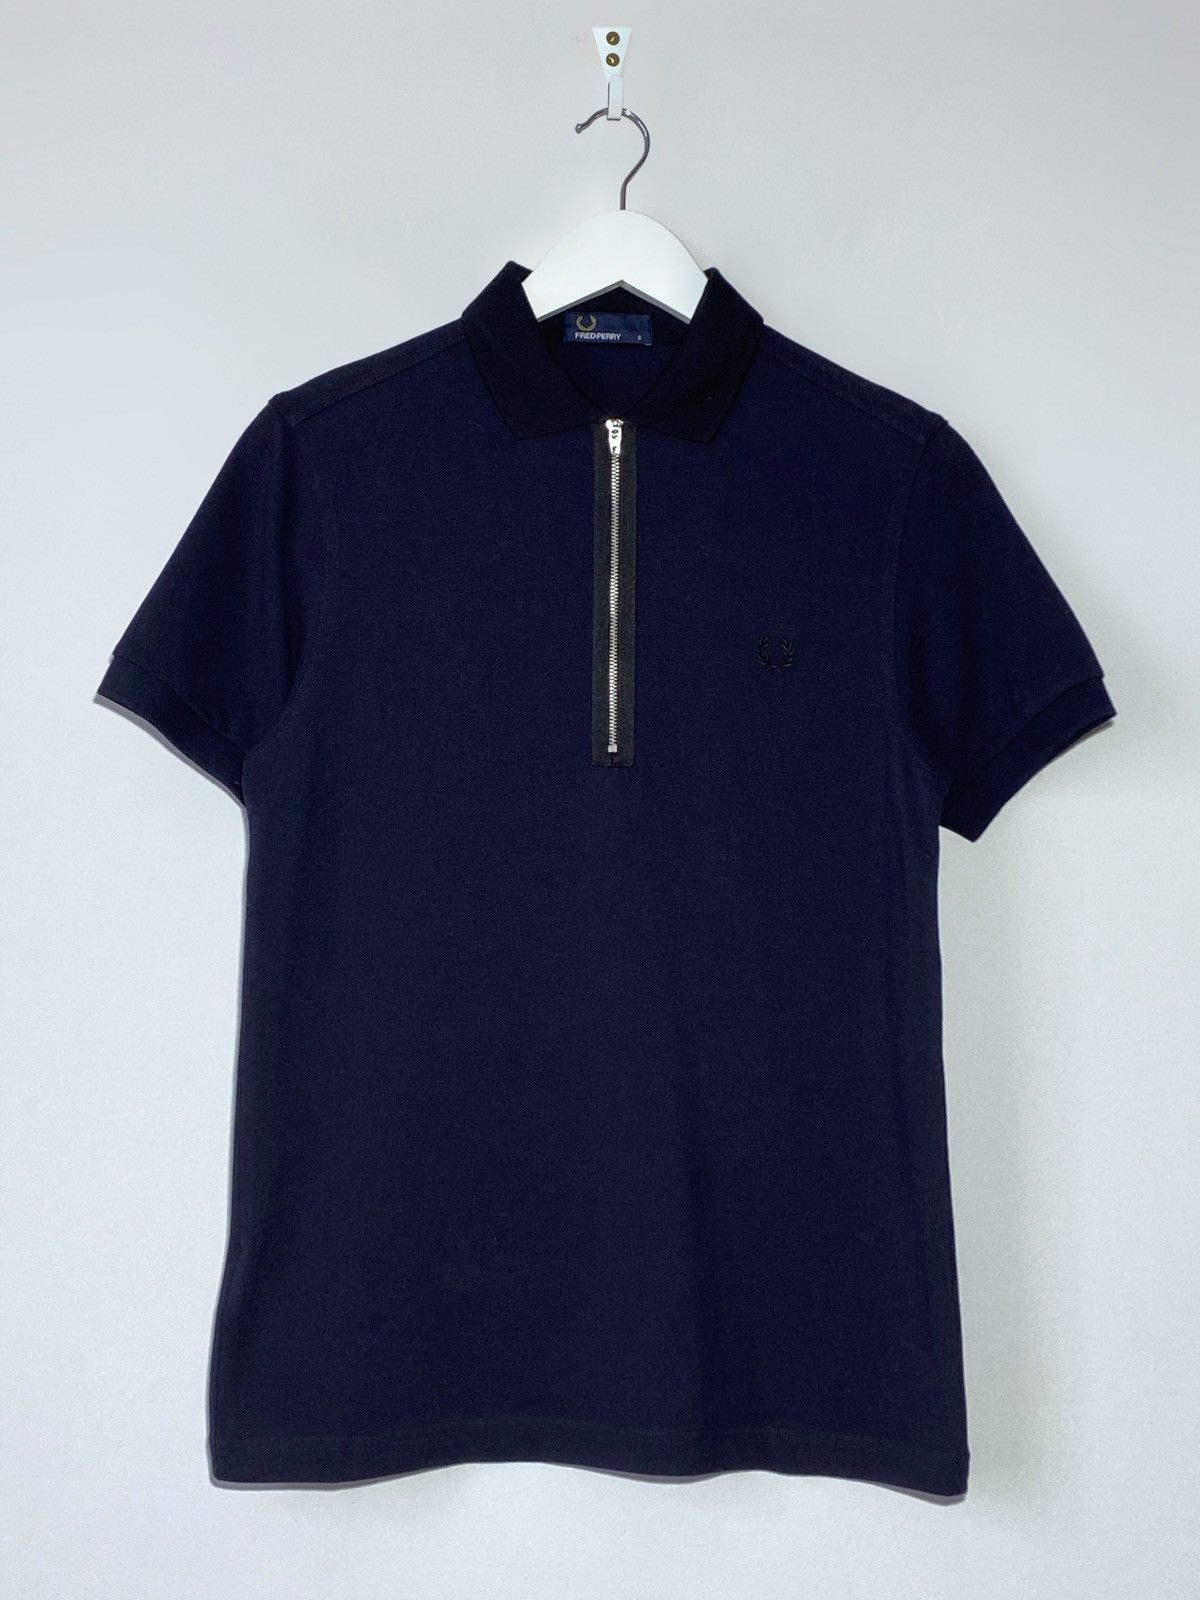 Fred Perry Fred Perry zip polo t-shirt | Grailed